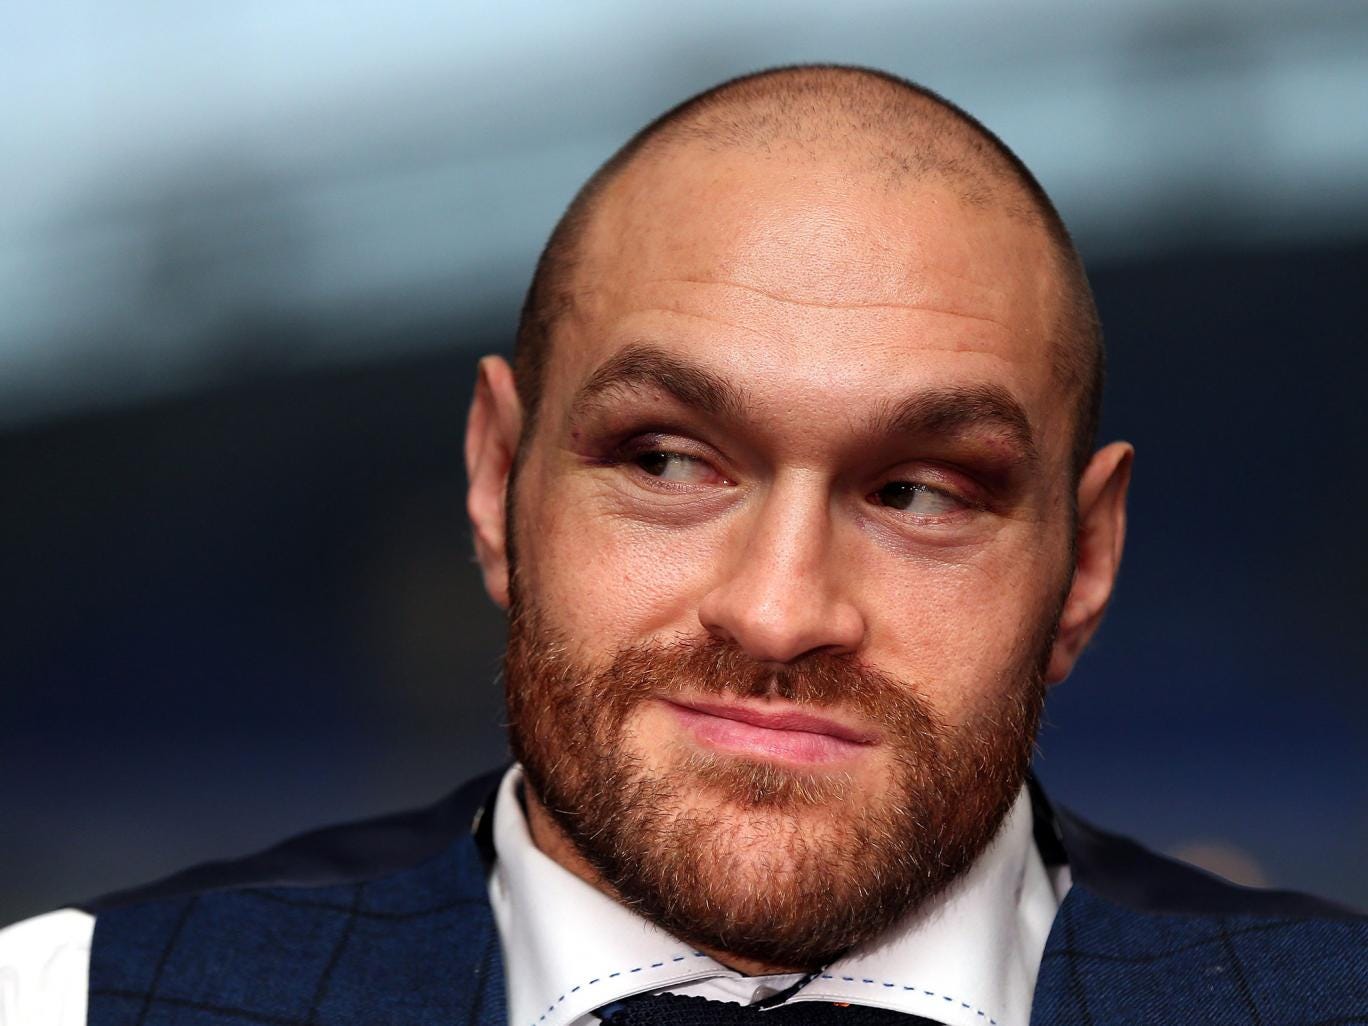 Tyson Fury responds to critics after homophobia and sexism accusations